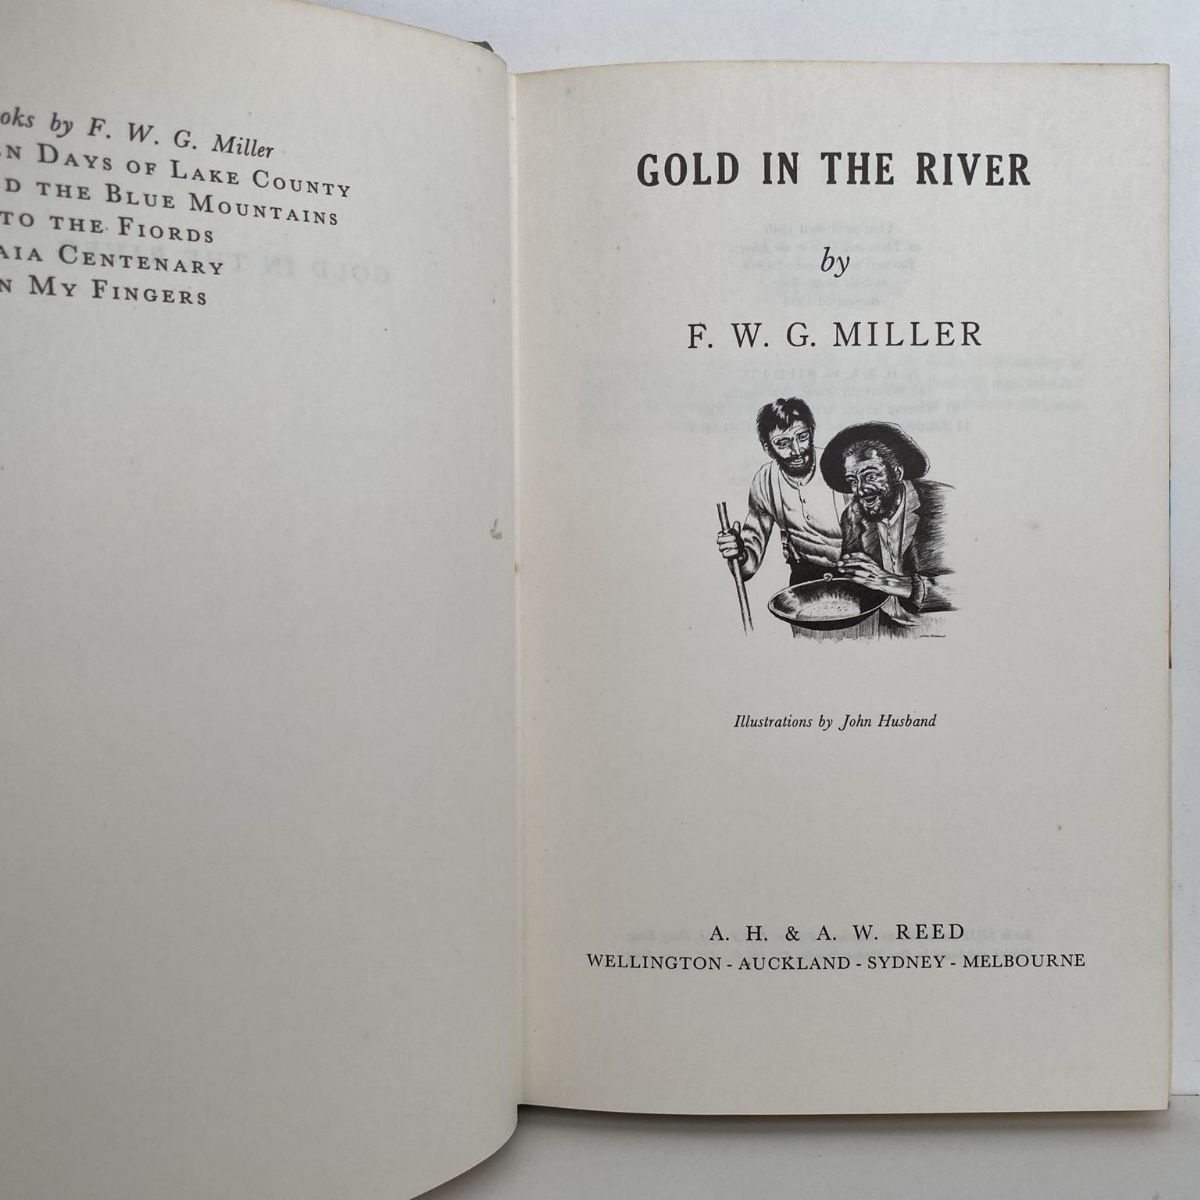 GOLD IN THE RIVER